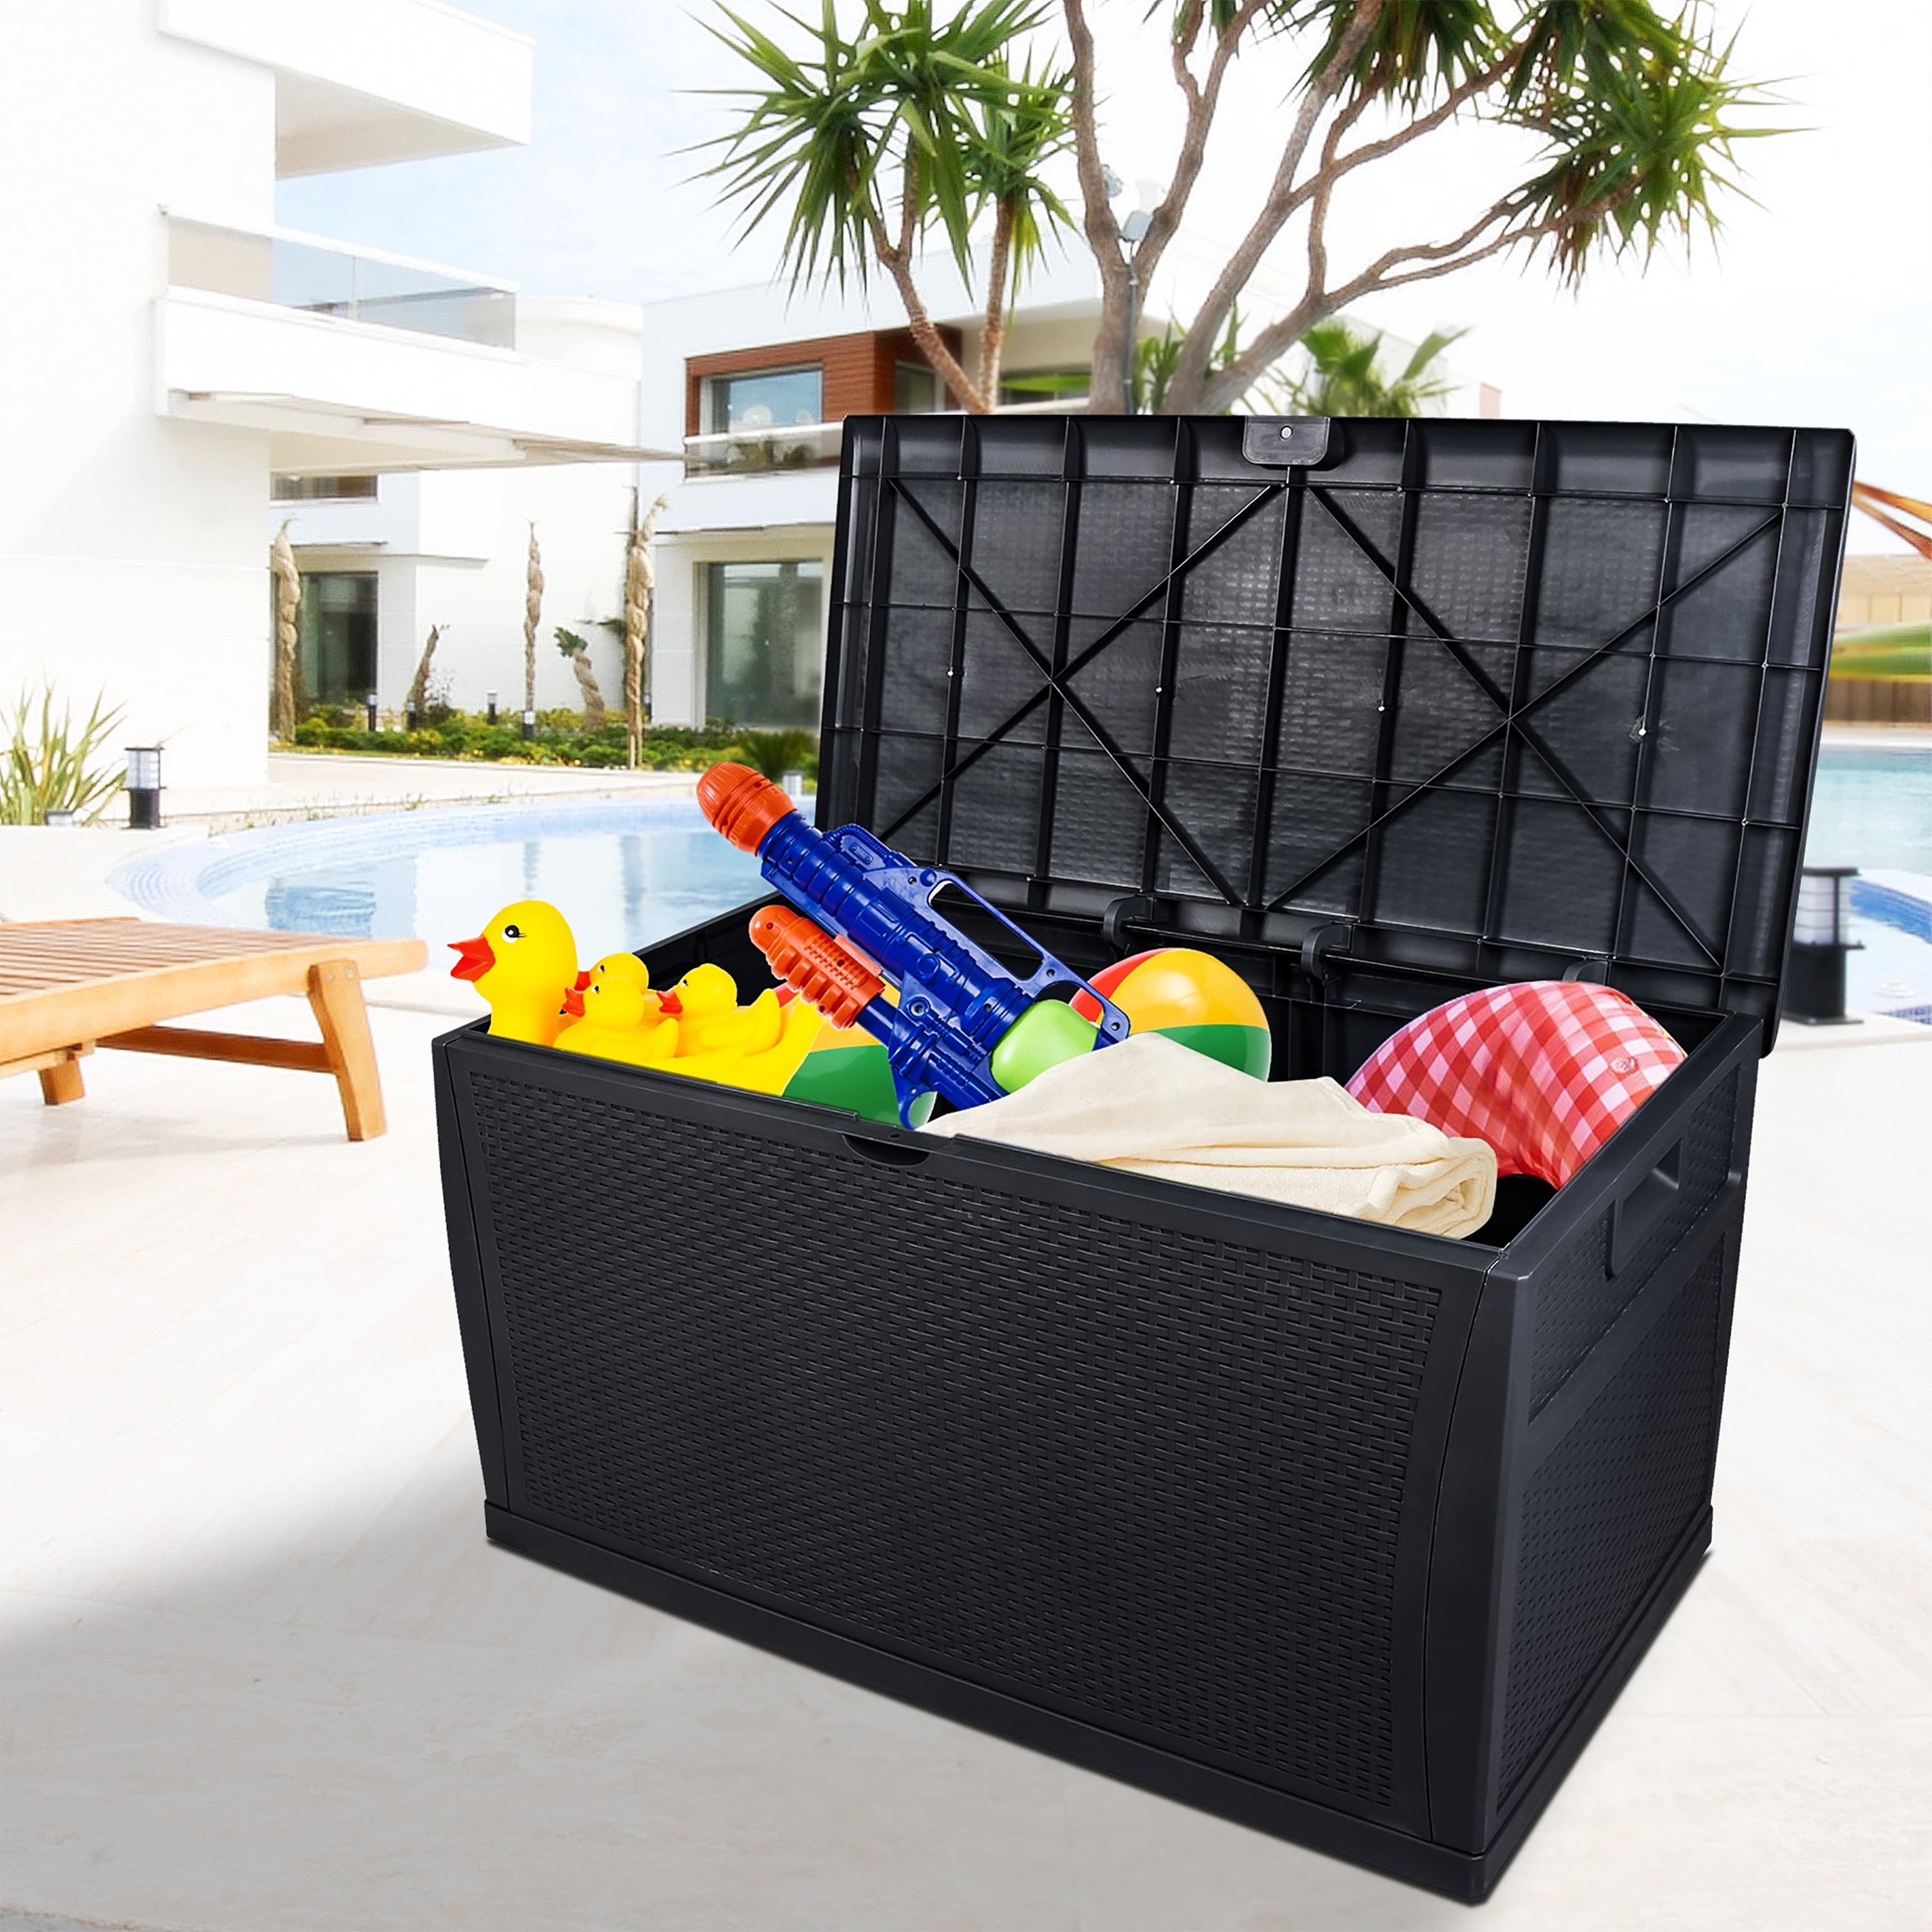 Pool Deck Storage Box, Plastic Outdoor Storage Box for Backyard Patio  Balcony, Gray 51 Gallon Outdoor Storage Containers with Reinforced Lid,  Waterproof and Weather-resistant, JA3228 